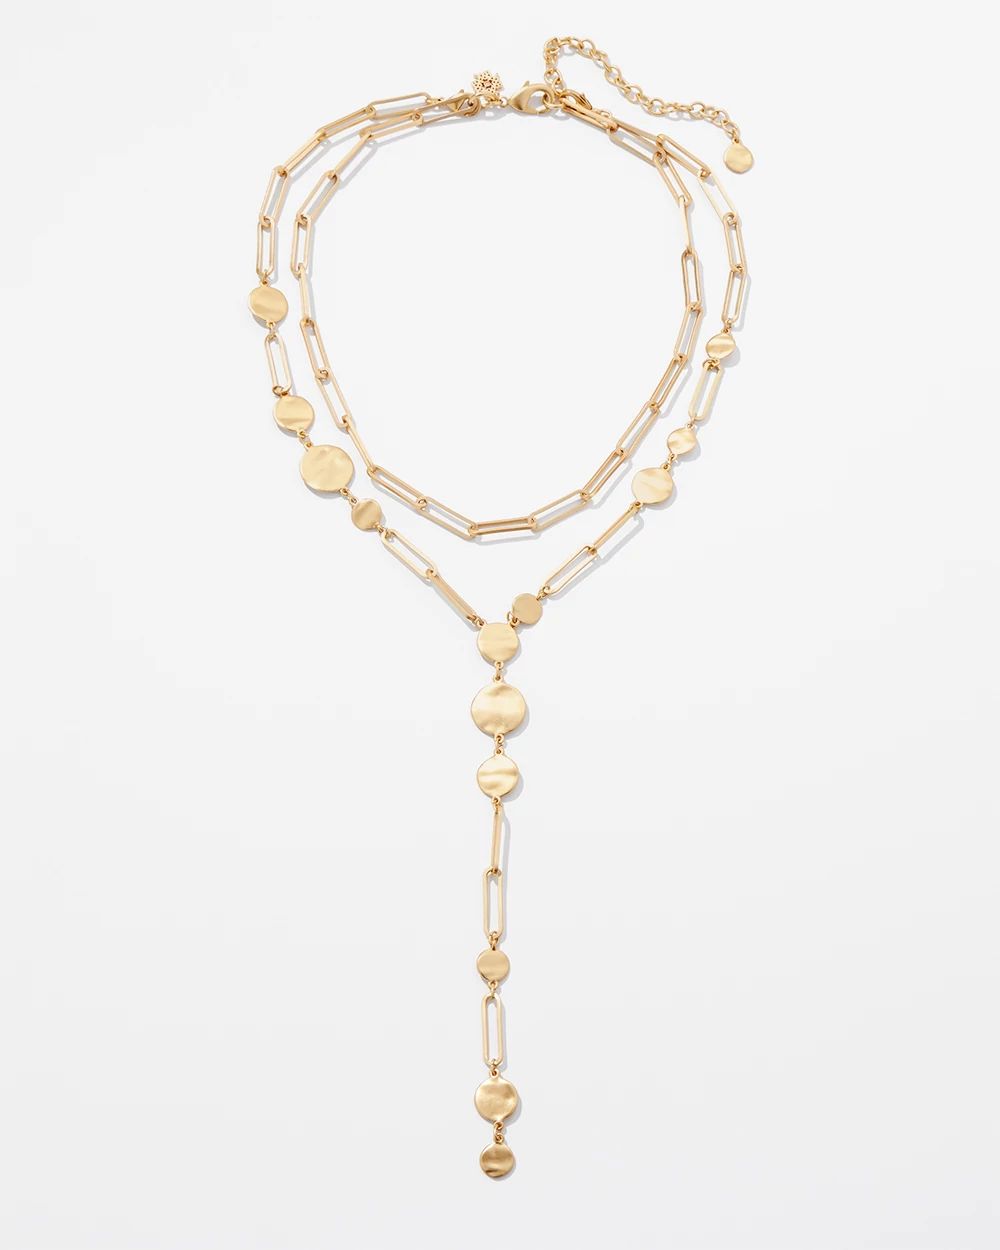 Goldtone Wavy Disc Y-Strand Convertible Necklace click to view larger image.